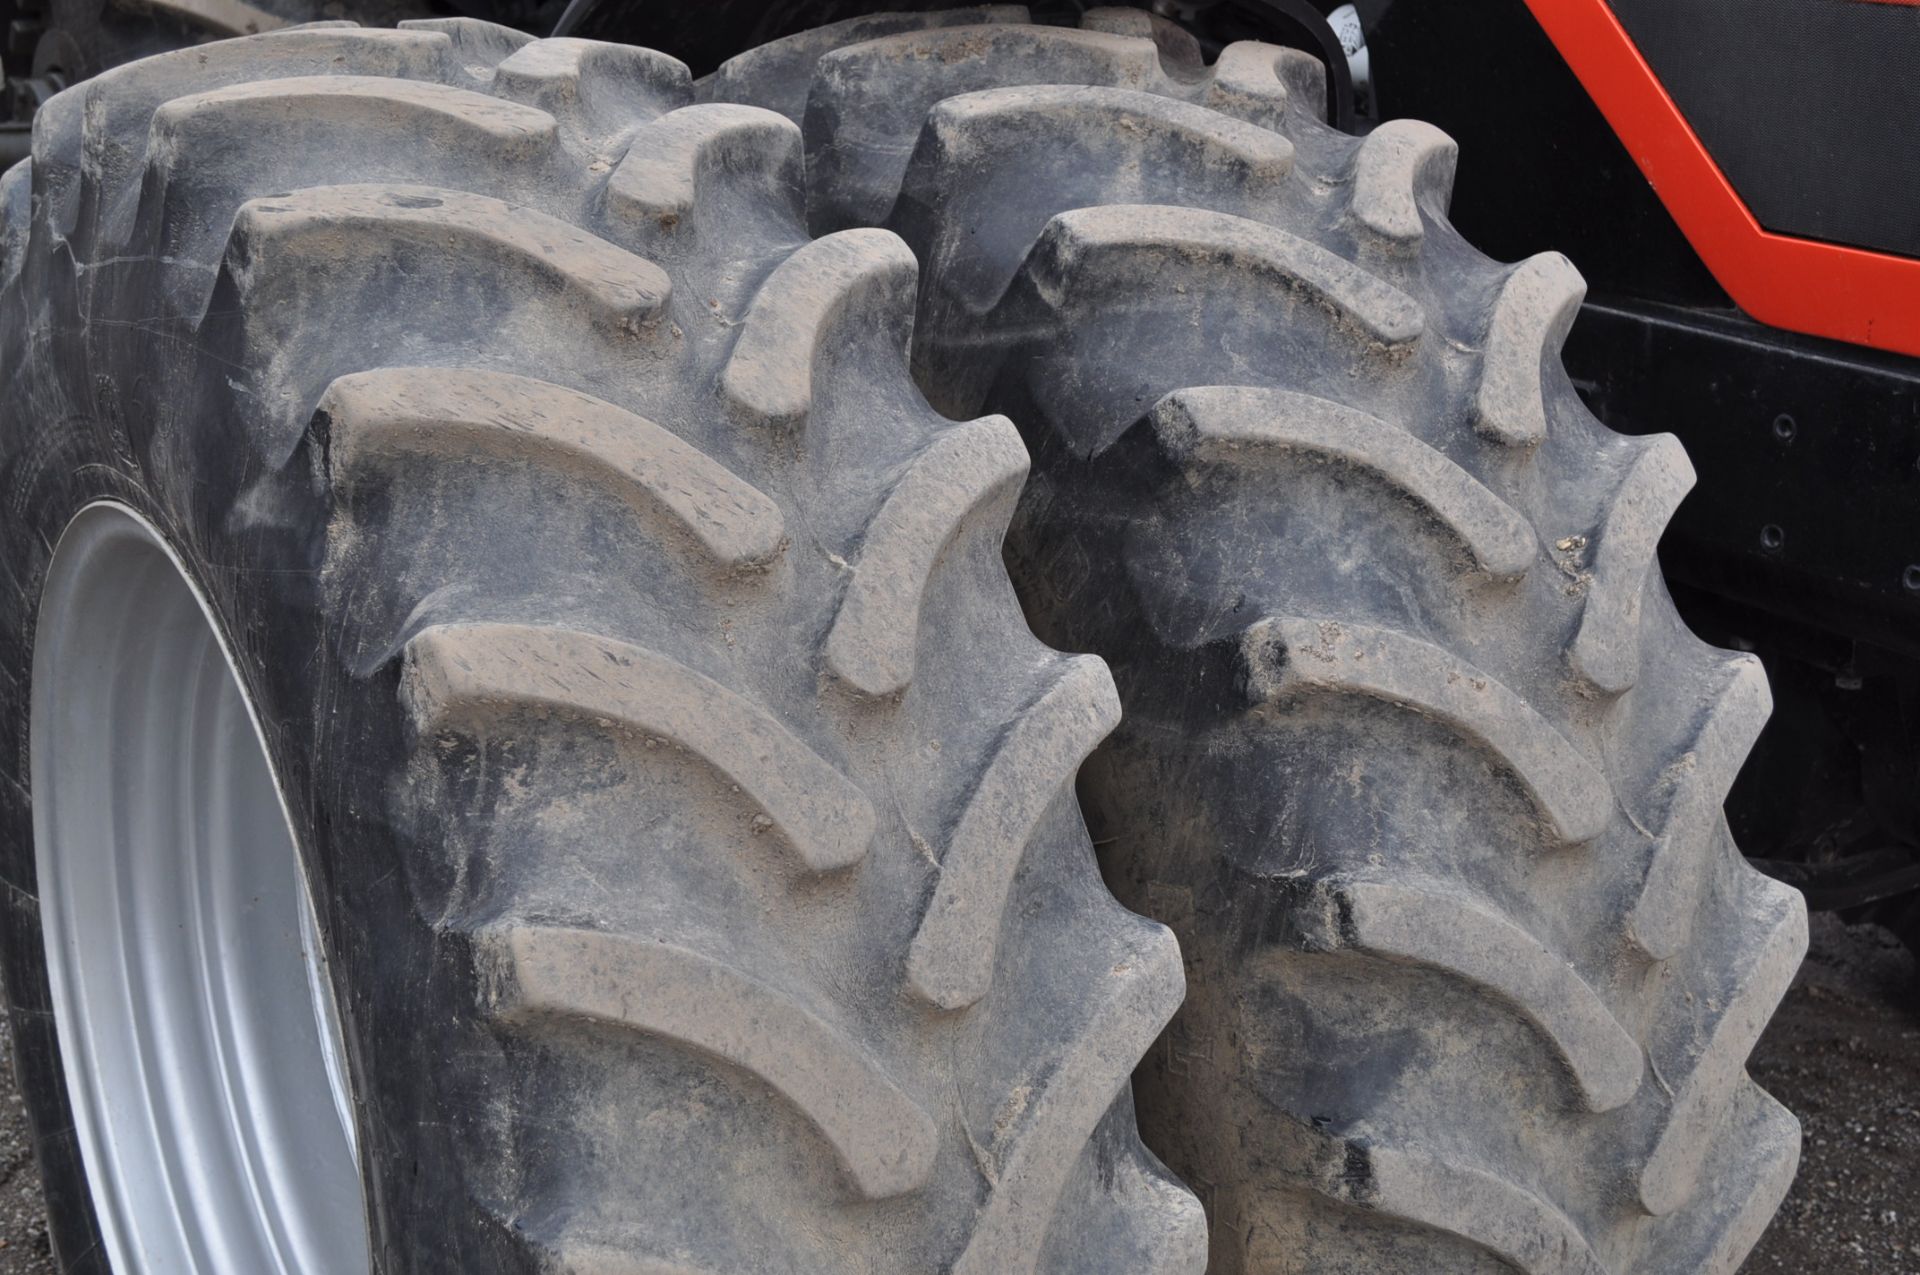 Agco Allis 9695 MFWD tractor, 520/85 R 42 rear duals, 420/90 R 30 front duals, fenders, frt wts, 3 - Image 8 of 18